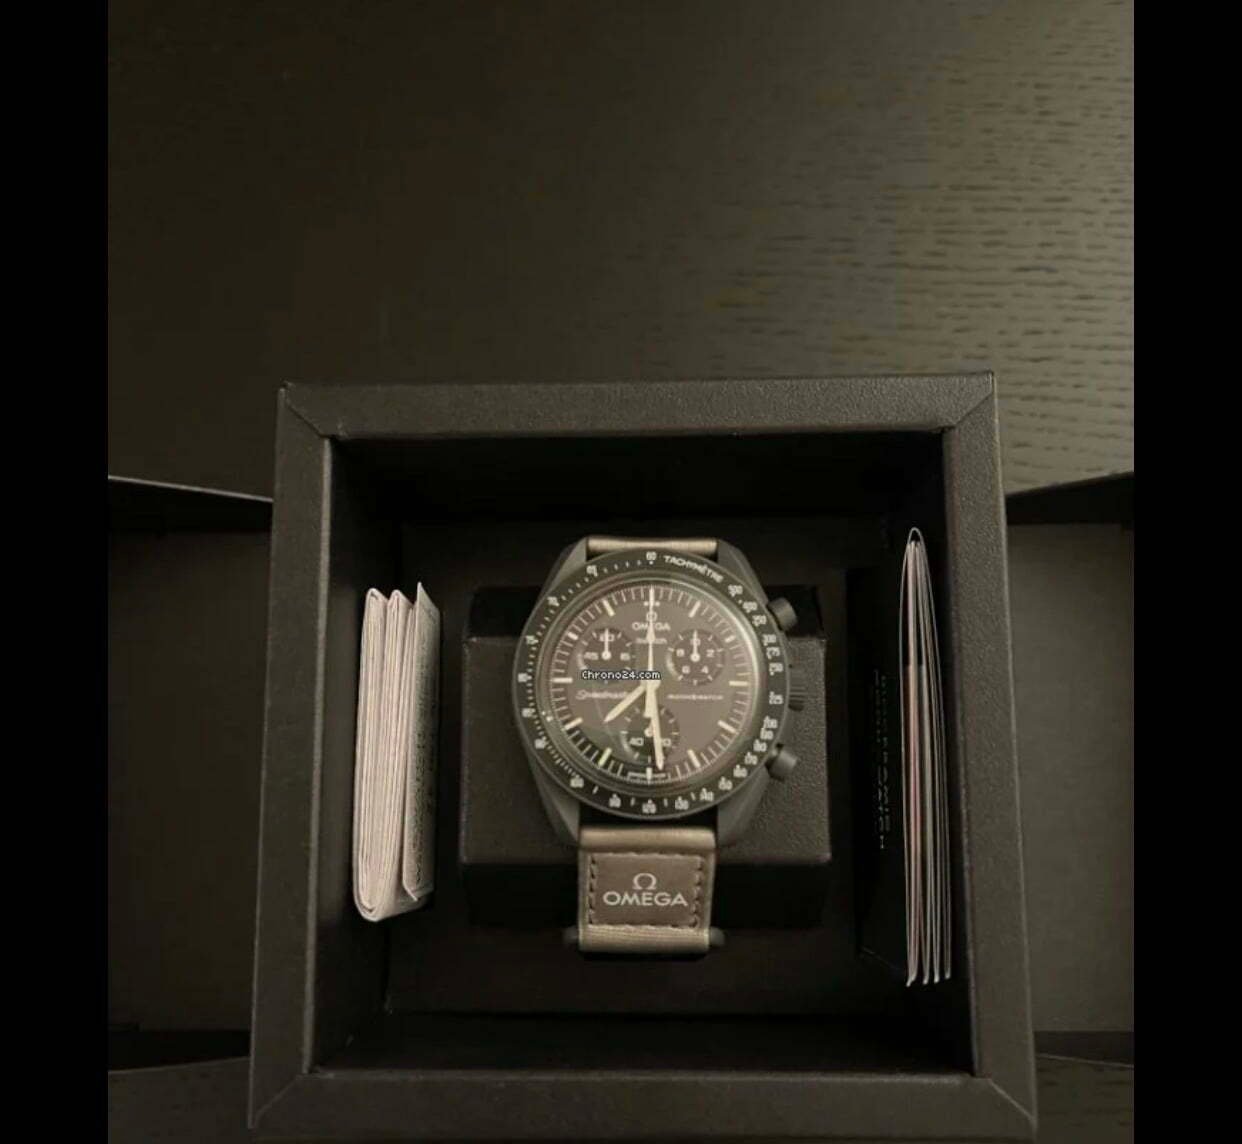 Omega swatch watch | Buy and Sell Luxury Watches | Strap Up